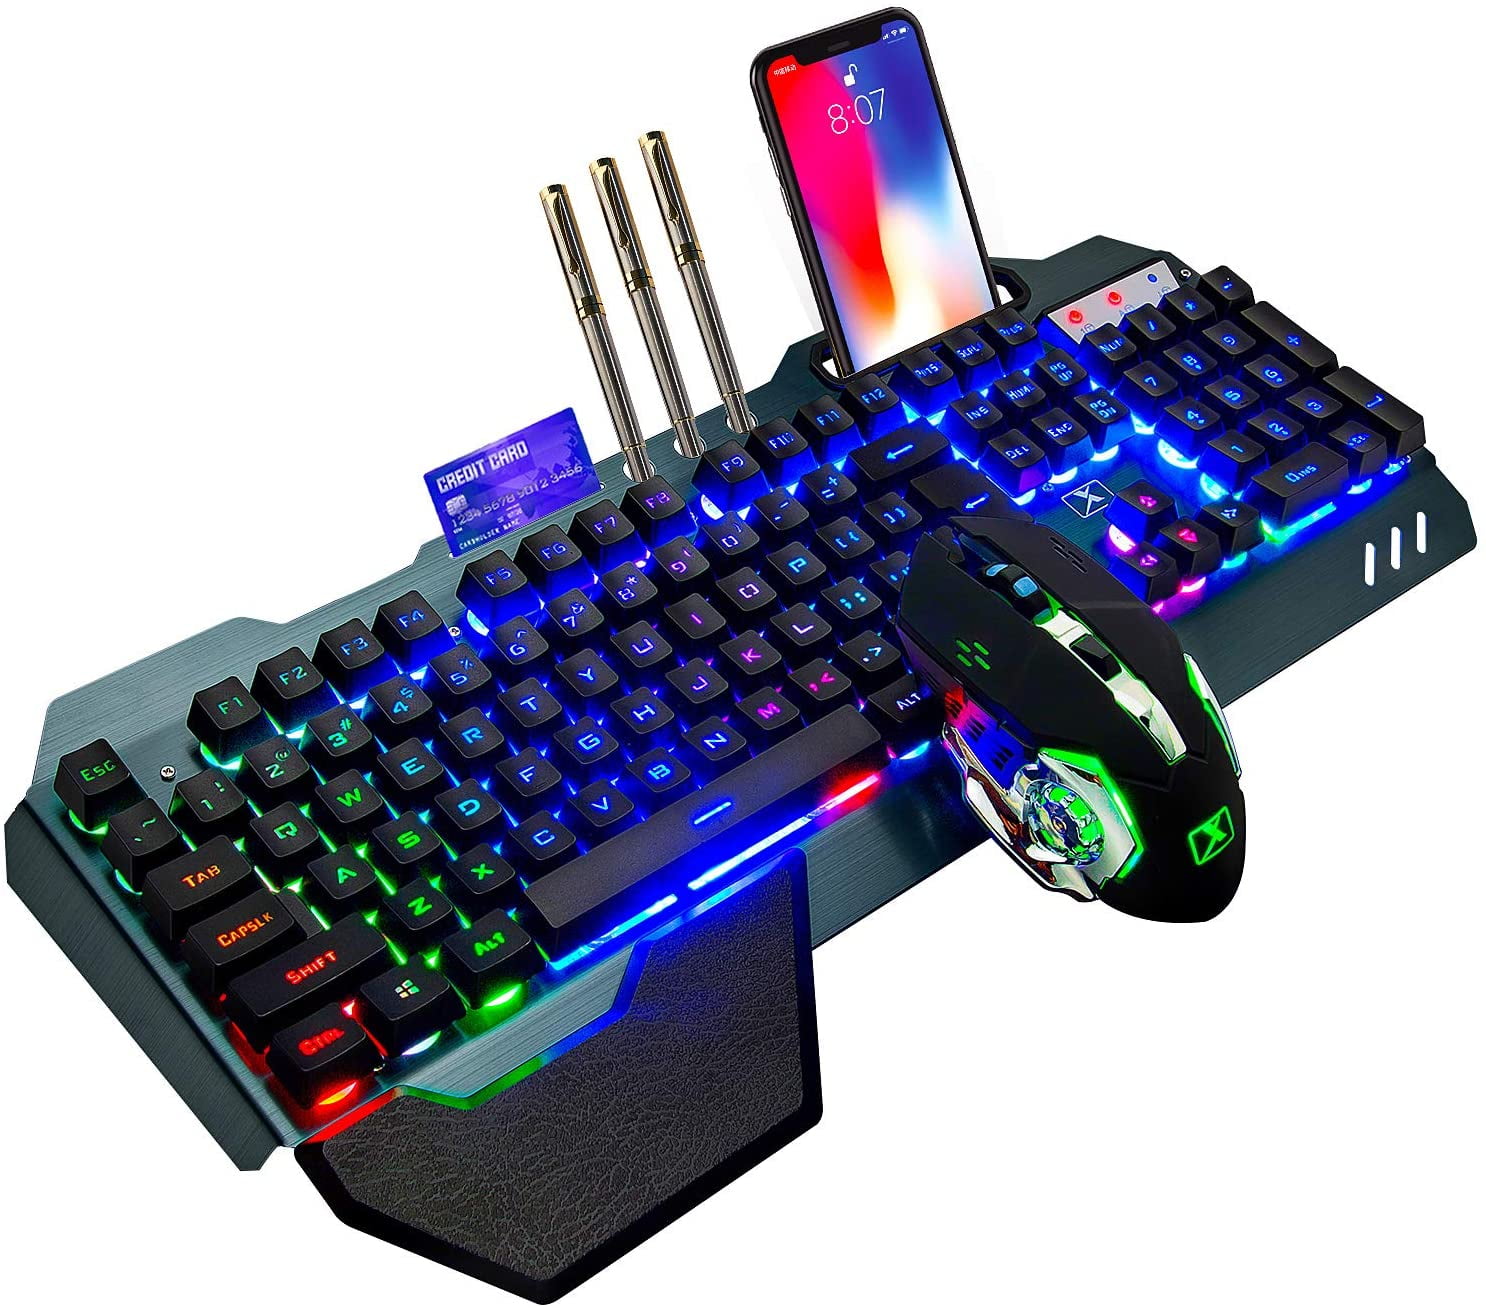 XINMENG Wireless Gaming Keyboard and Backlit Rechargeable Mouse 3800mAh Metal Panel,Removable Hand Rest Mechanical Feel Gaming Mute Mouse for PC PS4 PS5 Xbox Gamers Walmart.com